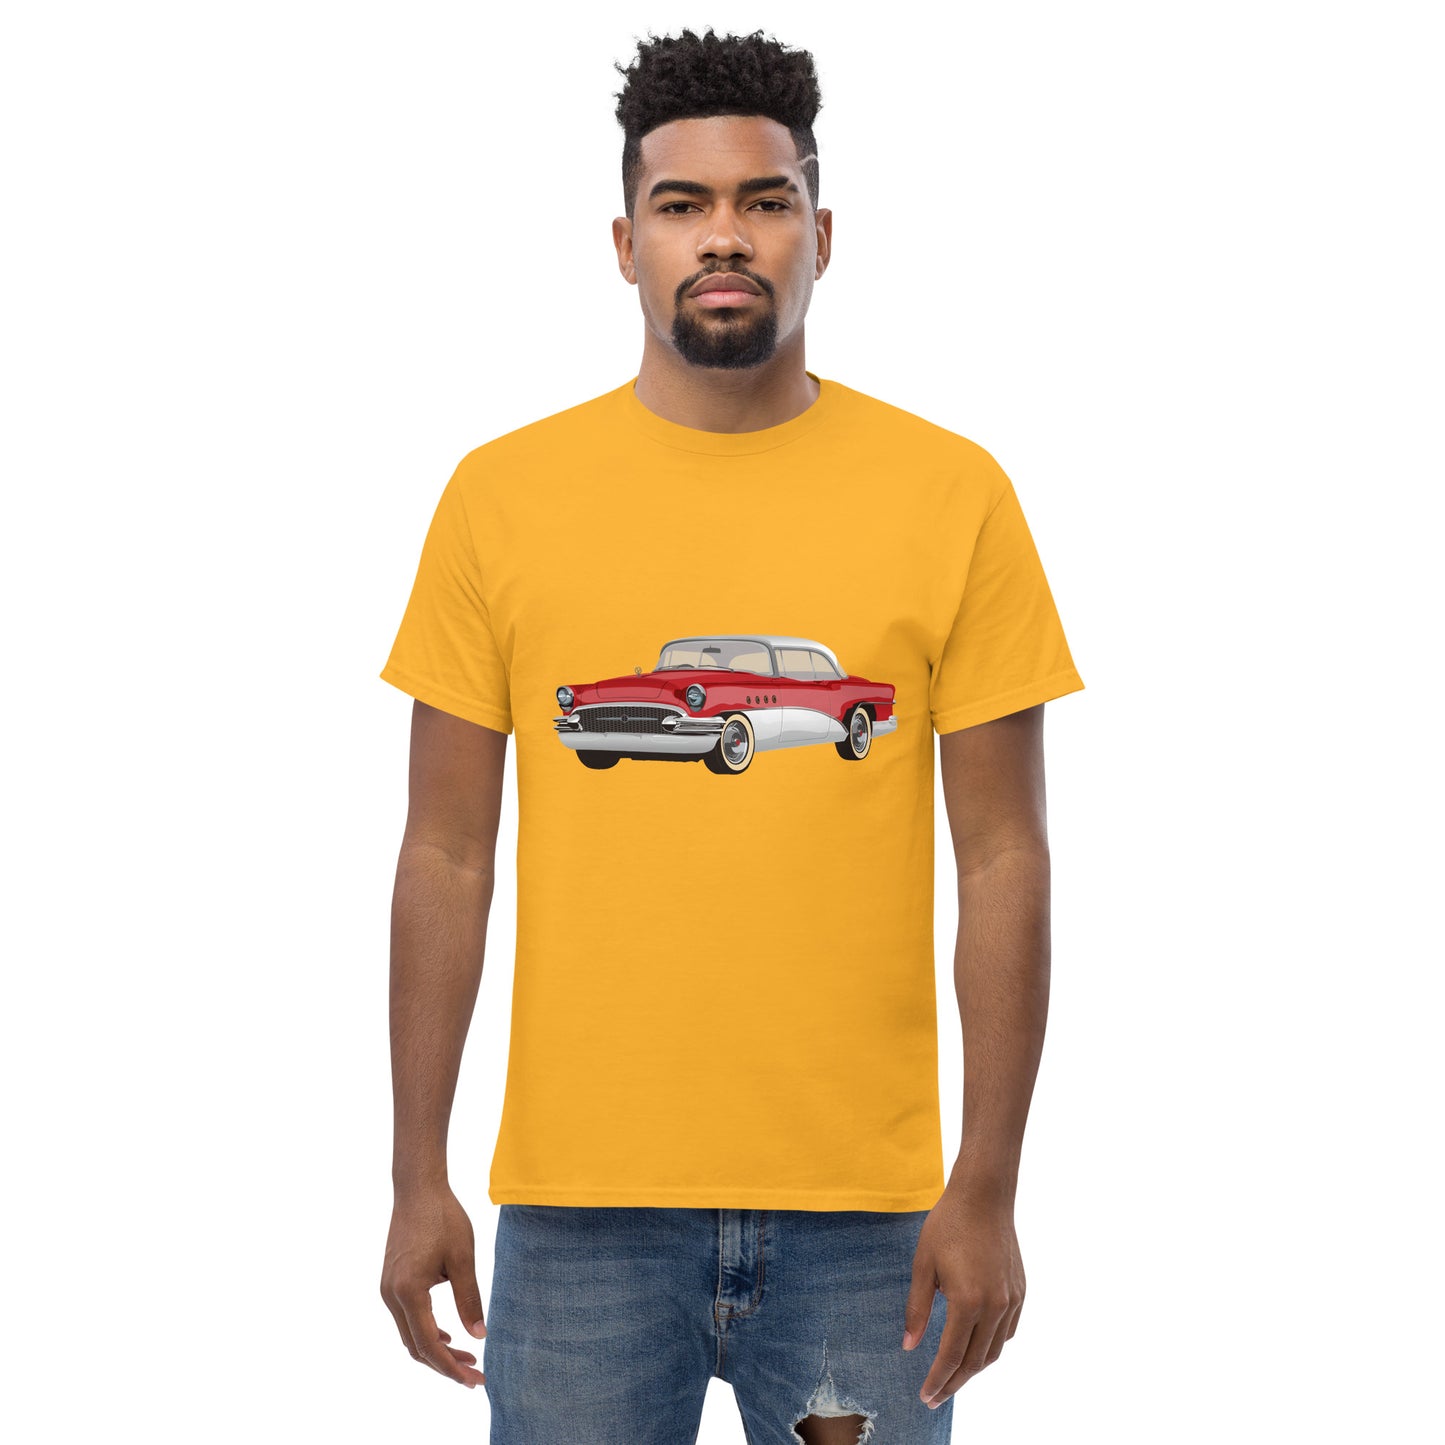 Men with sand t-shirt with red Chevrolet 